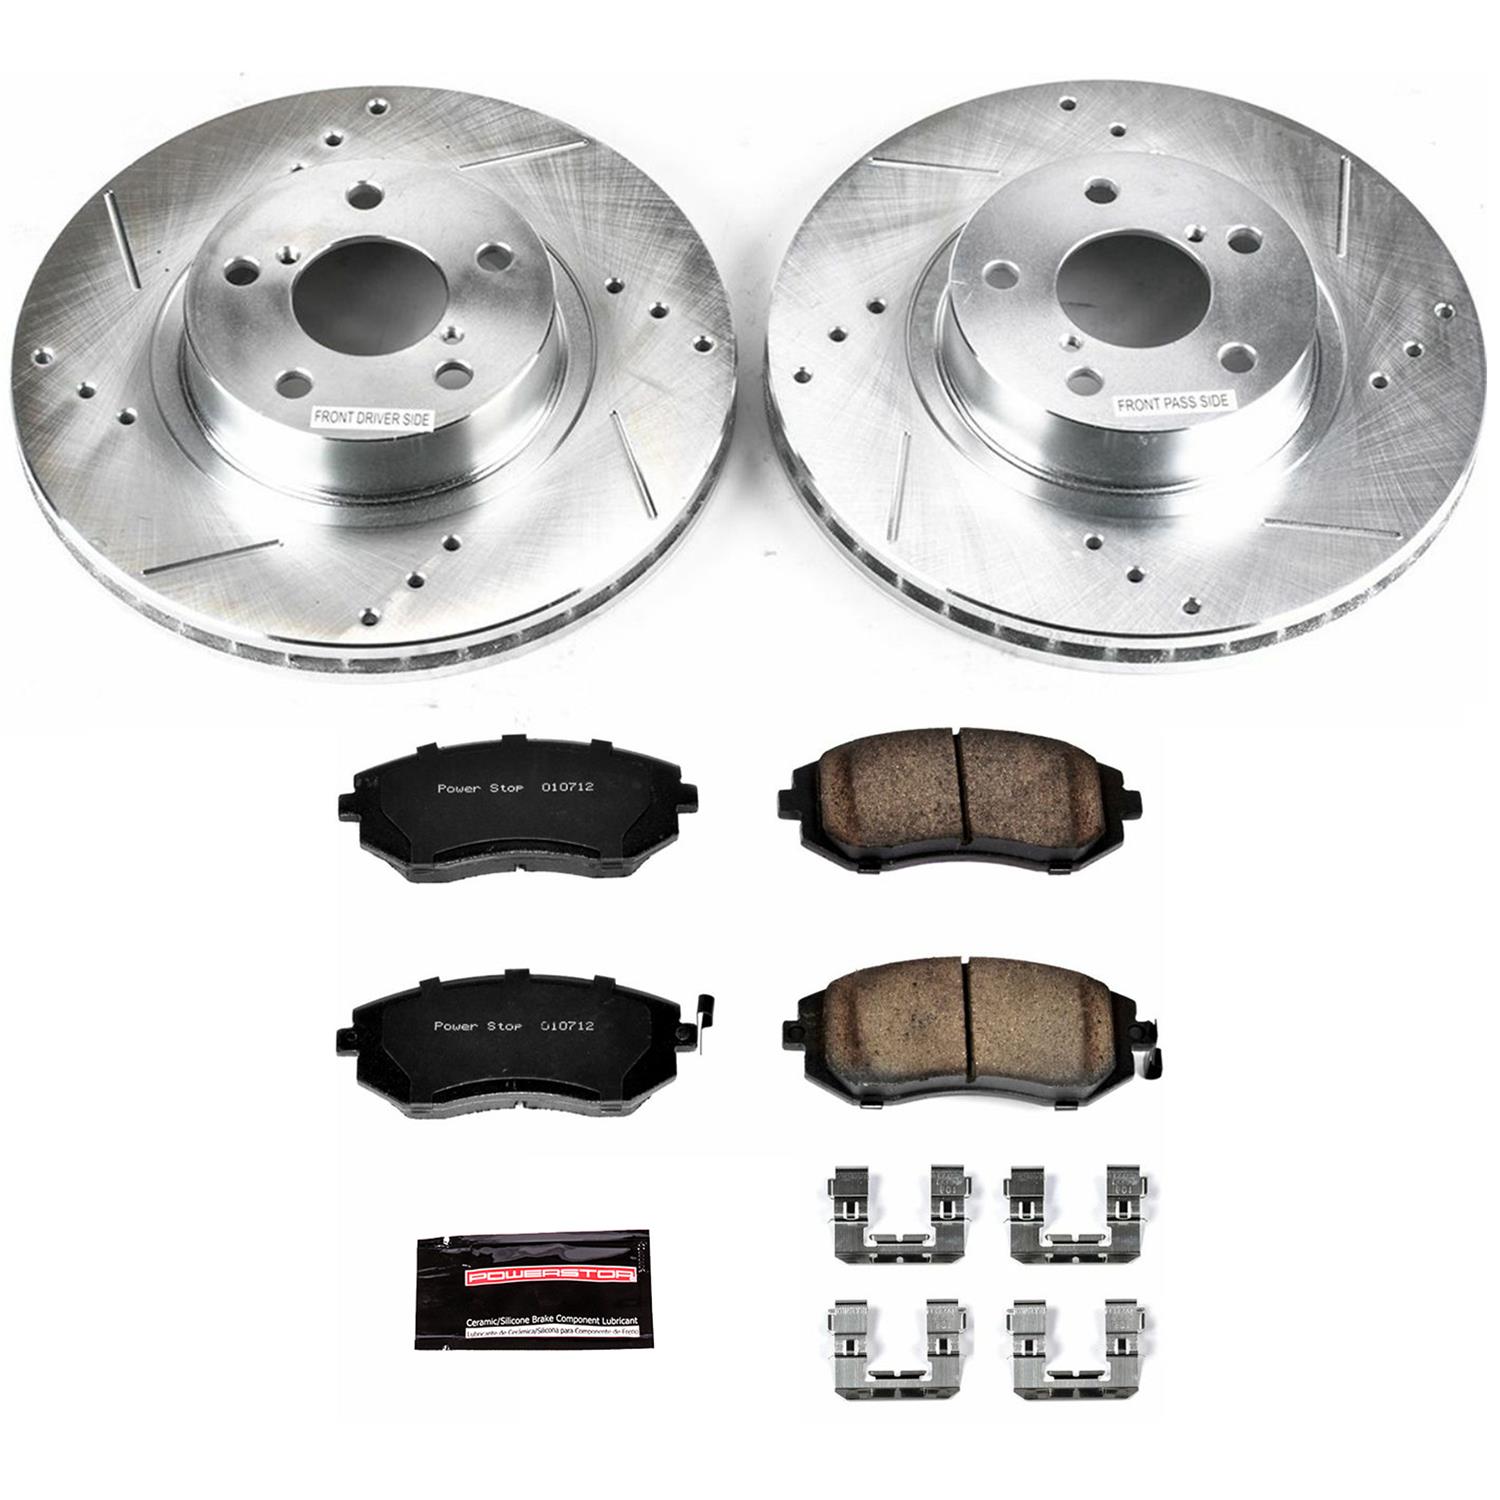 Power Sport Cross Drilled Slotted Brake Rotors and Ceramic Brake Pads Kit 80897 FRONTS